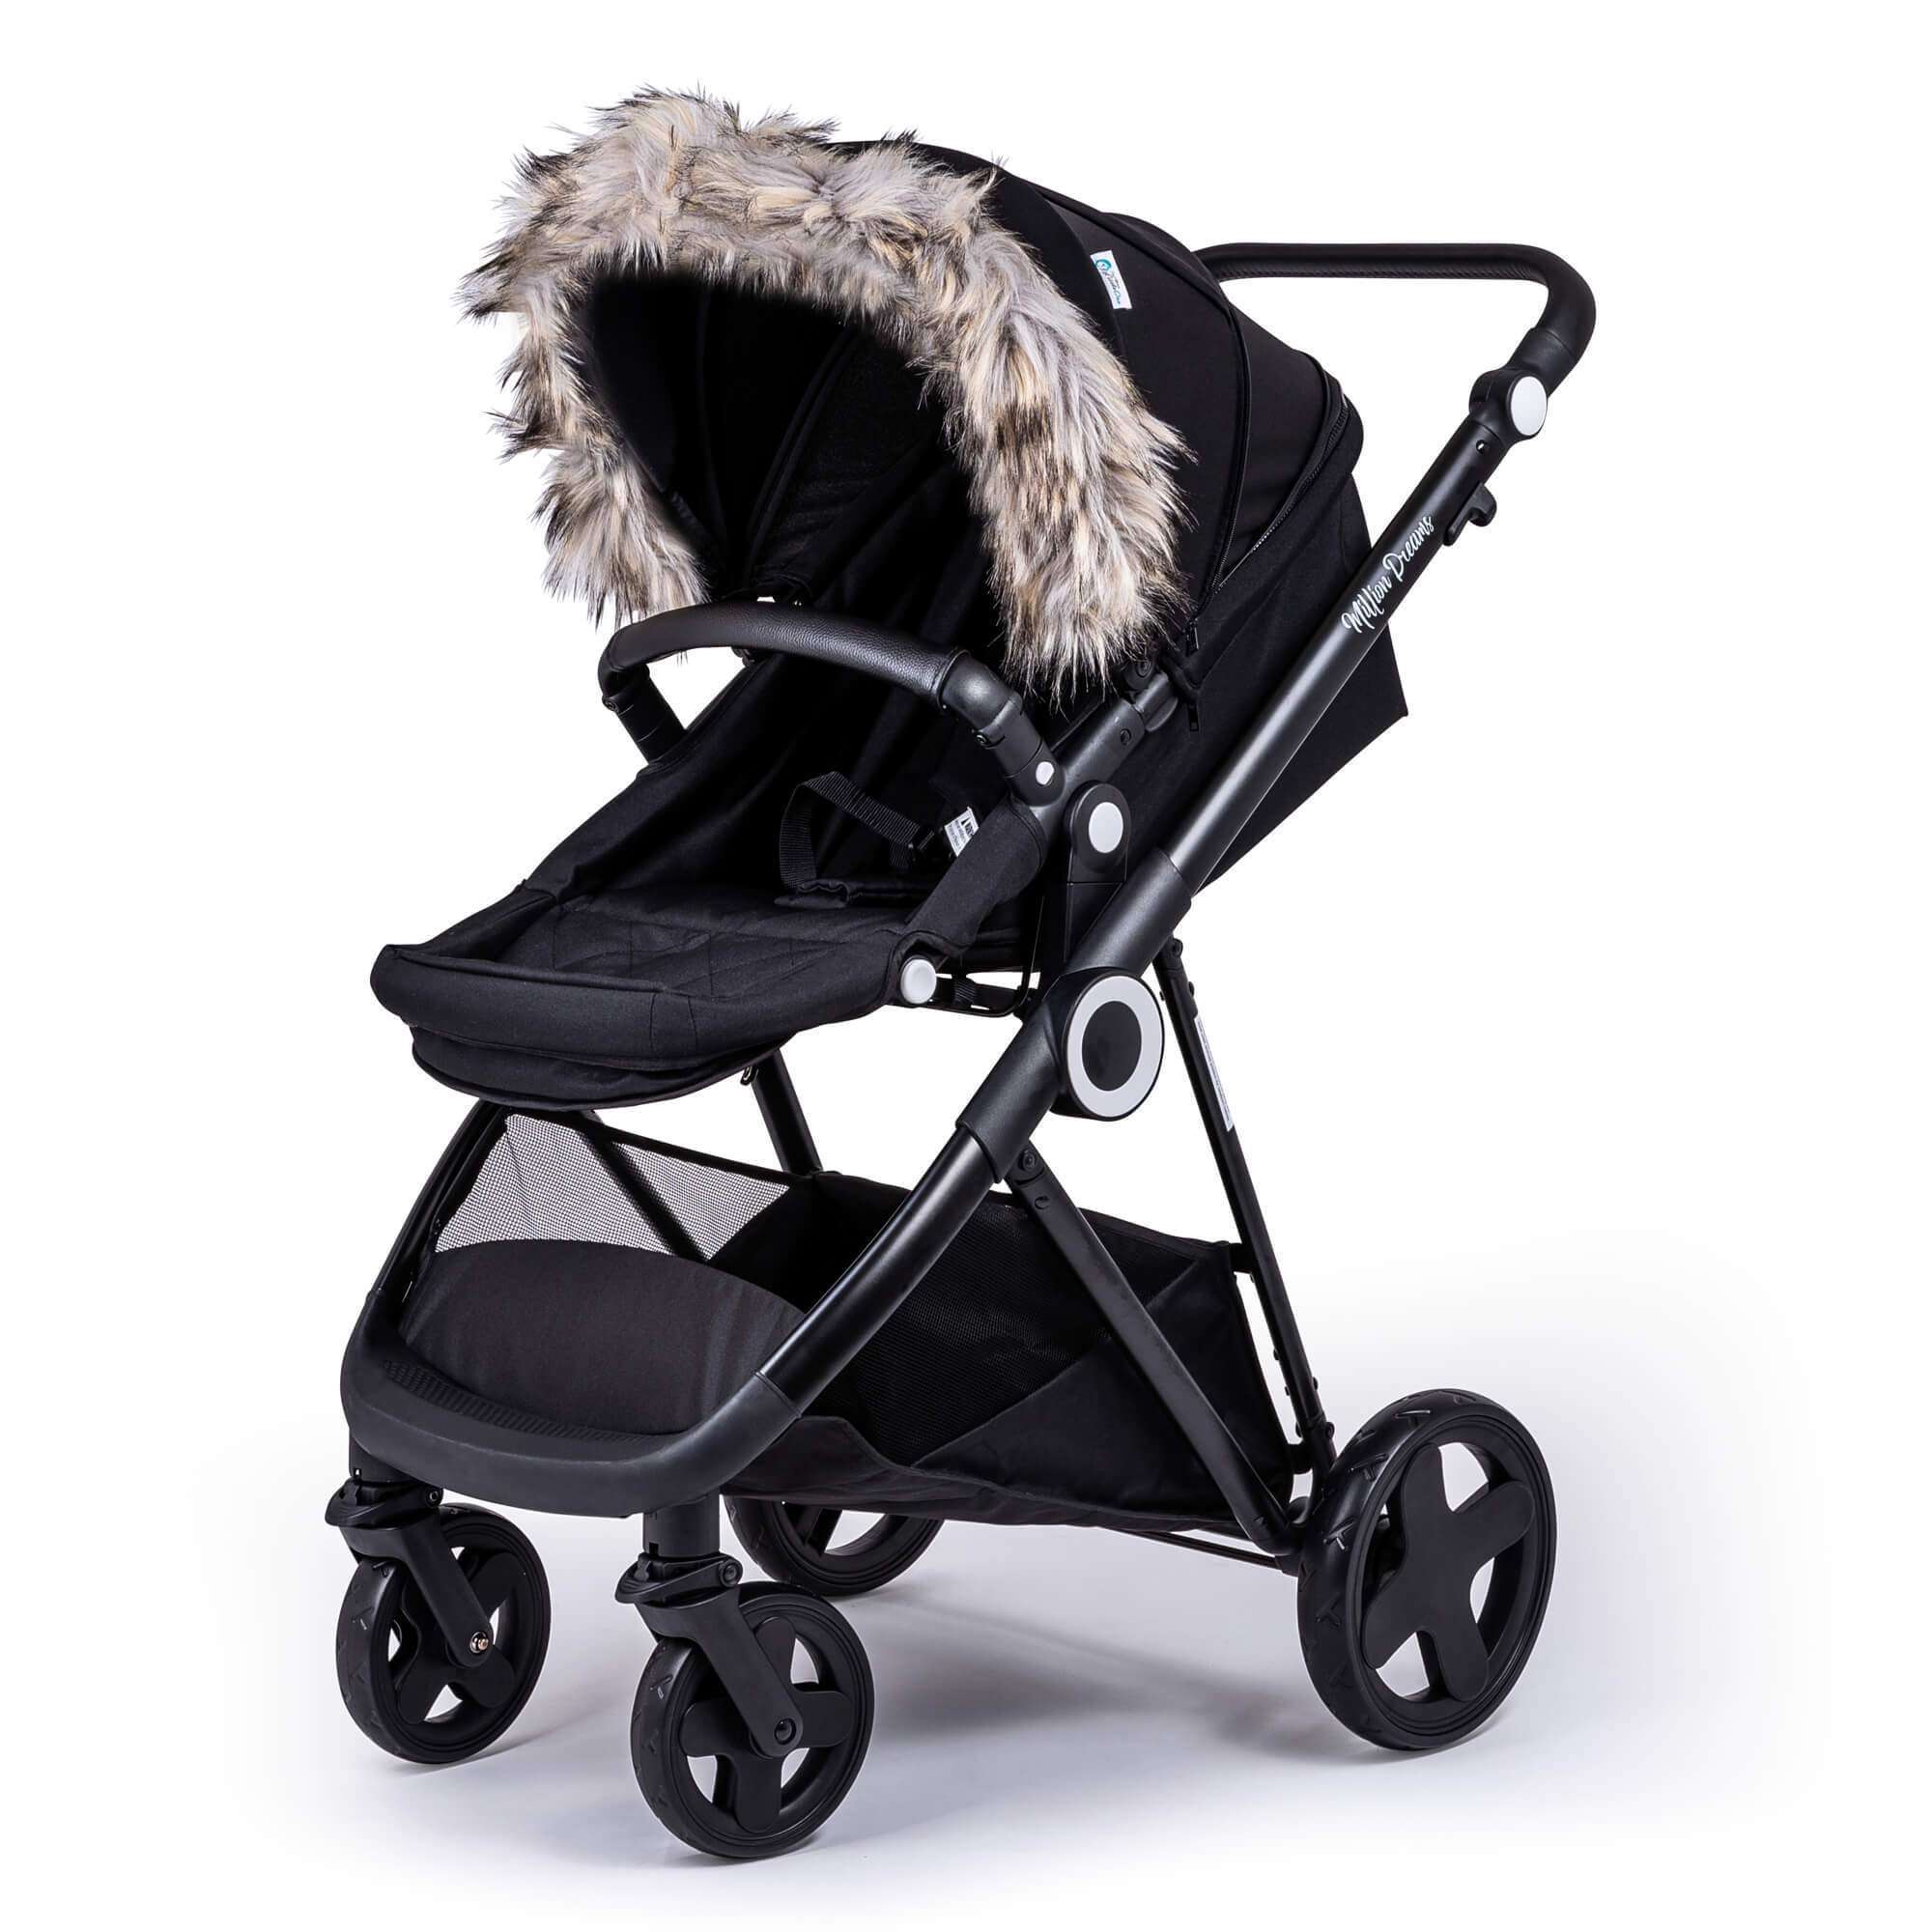 Pram Fur Hood Trim Attachment for Pushchair Compatible with Hartan - Light Grey / Fits All Models | For Your Little One